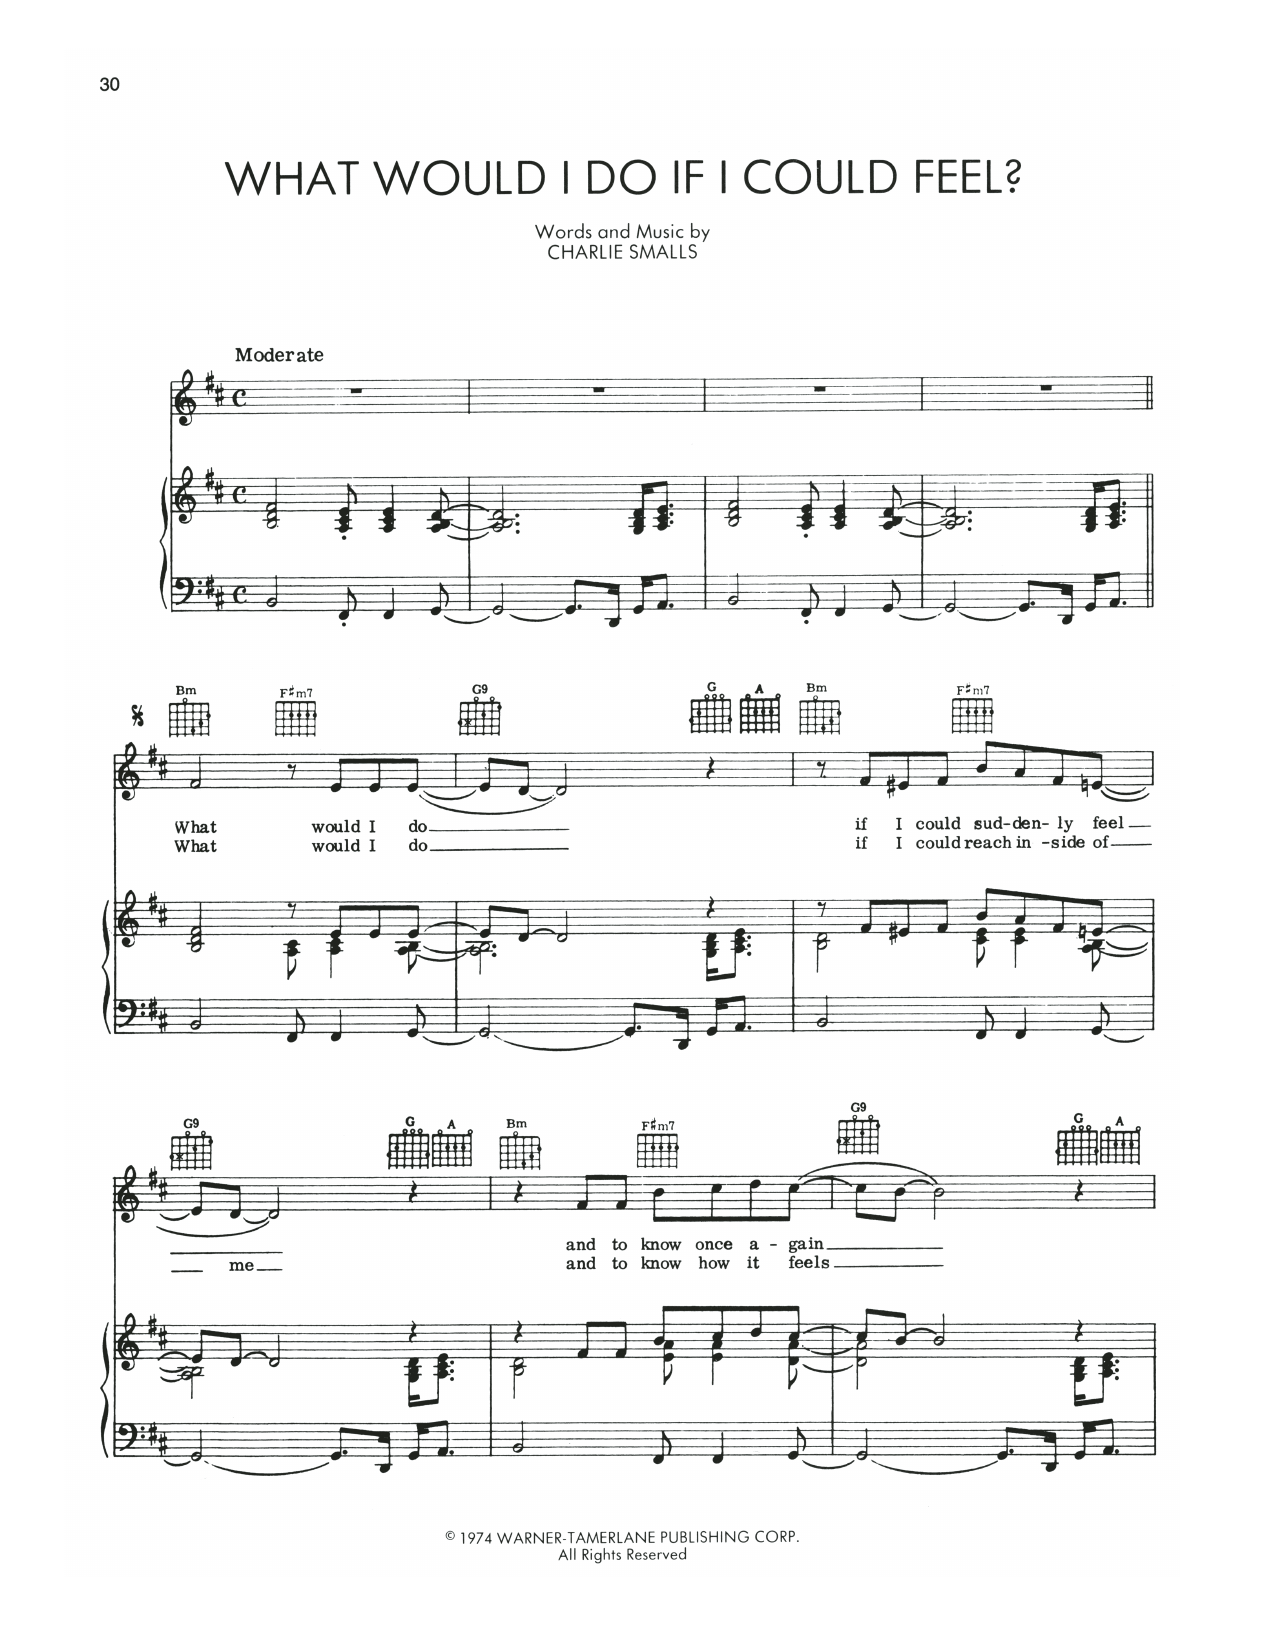 Download Charlie Smalls What Would I Do If I Could Feel? (from Sheet Music